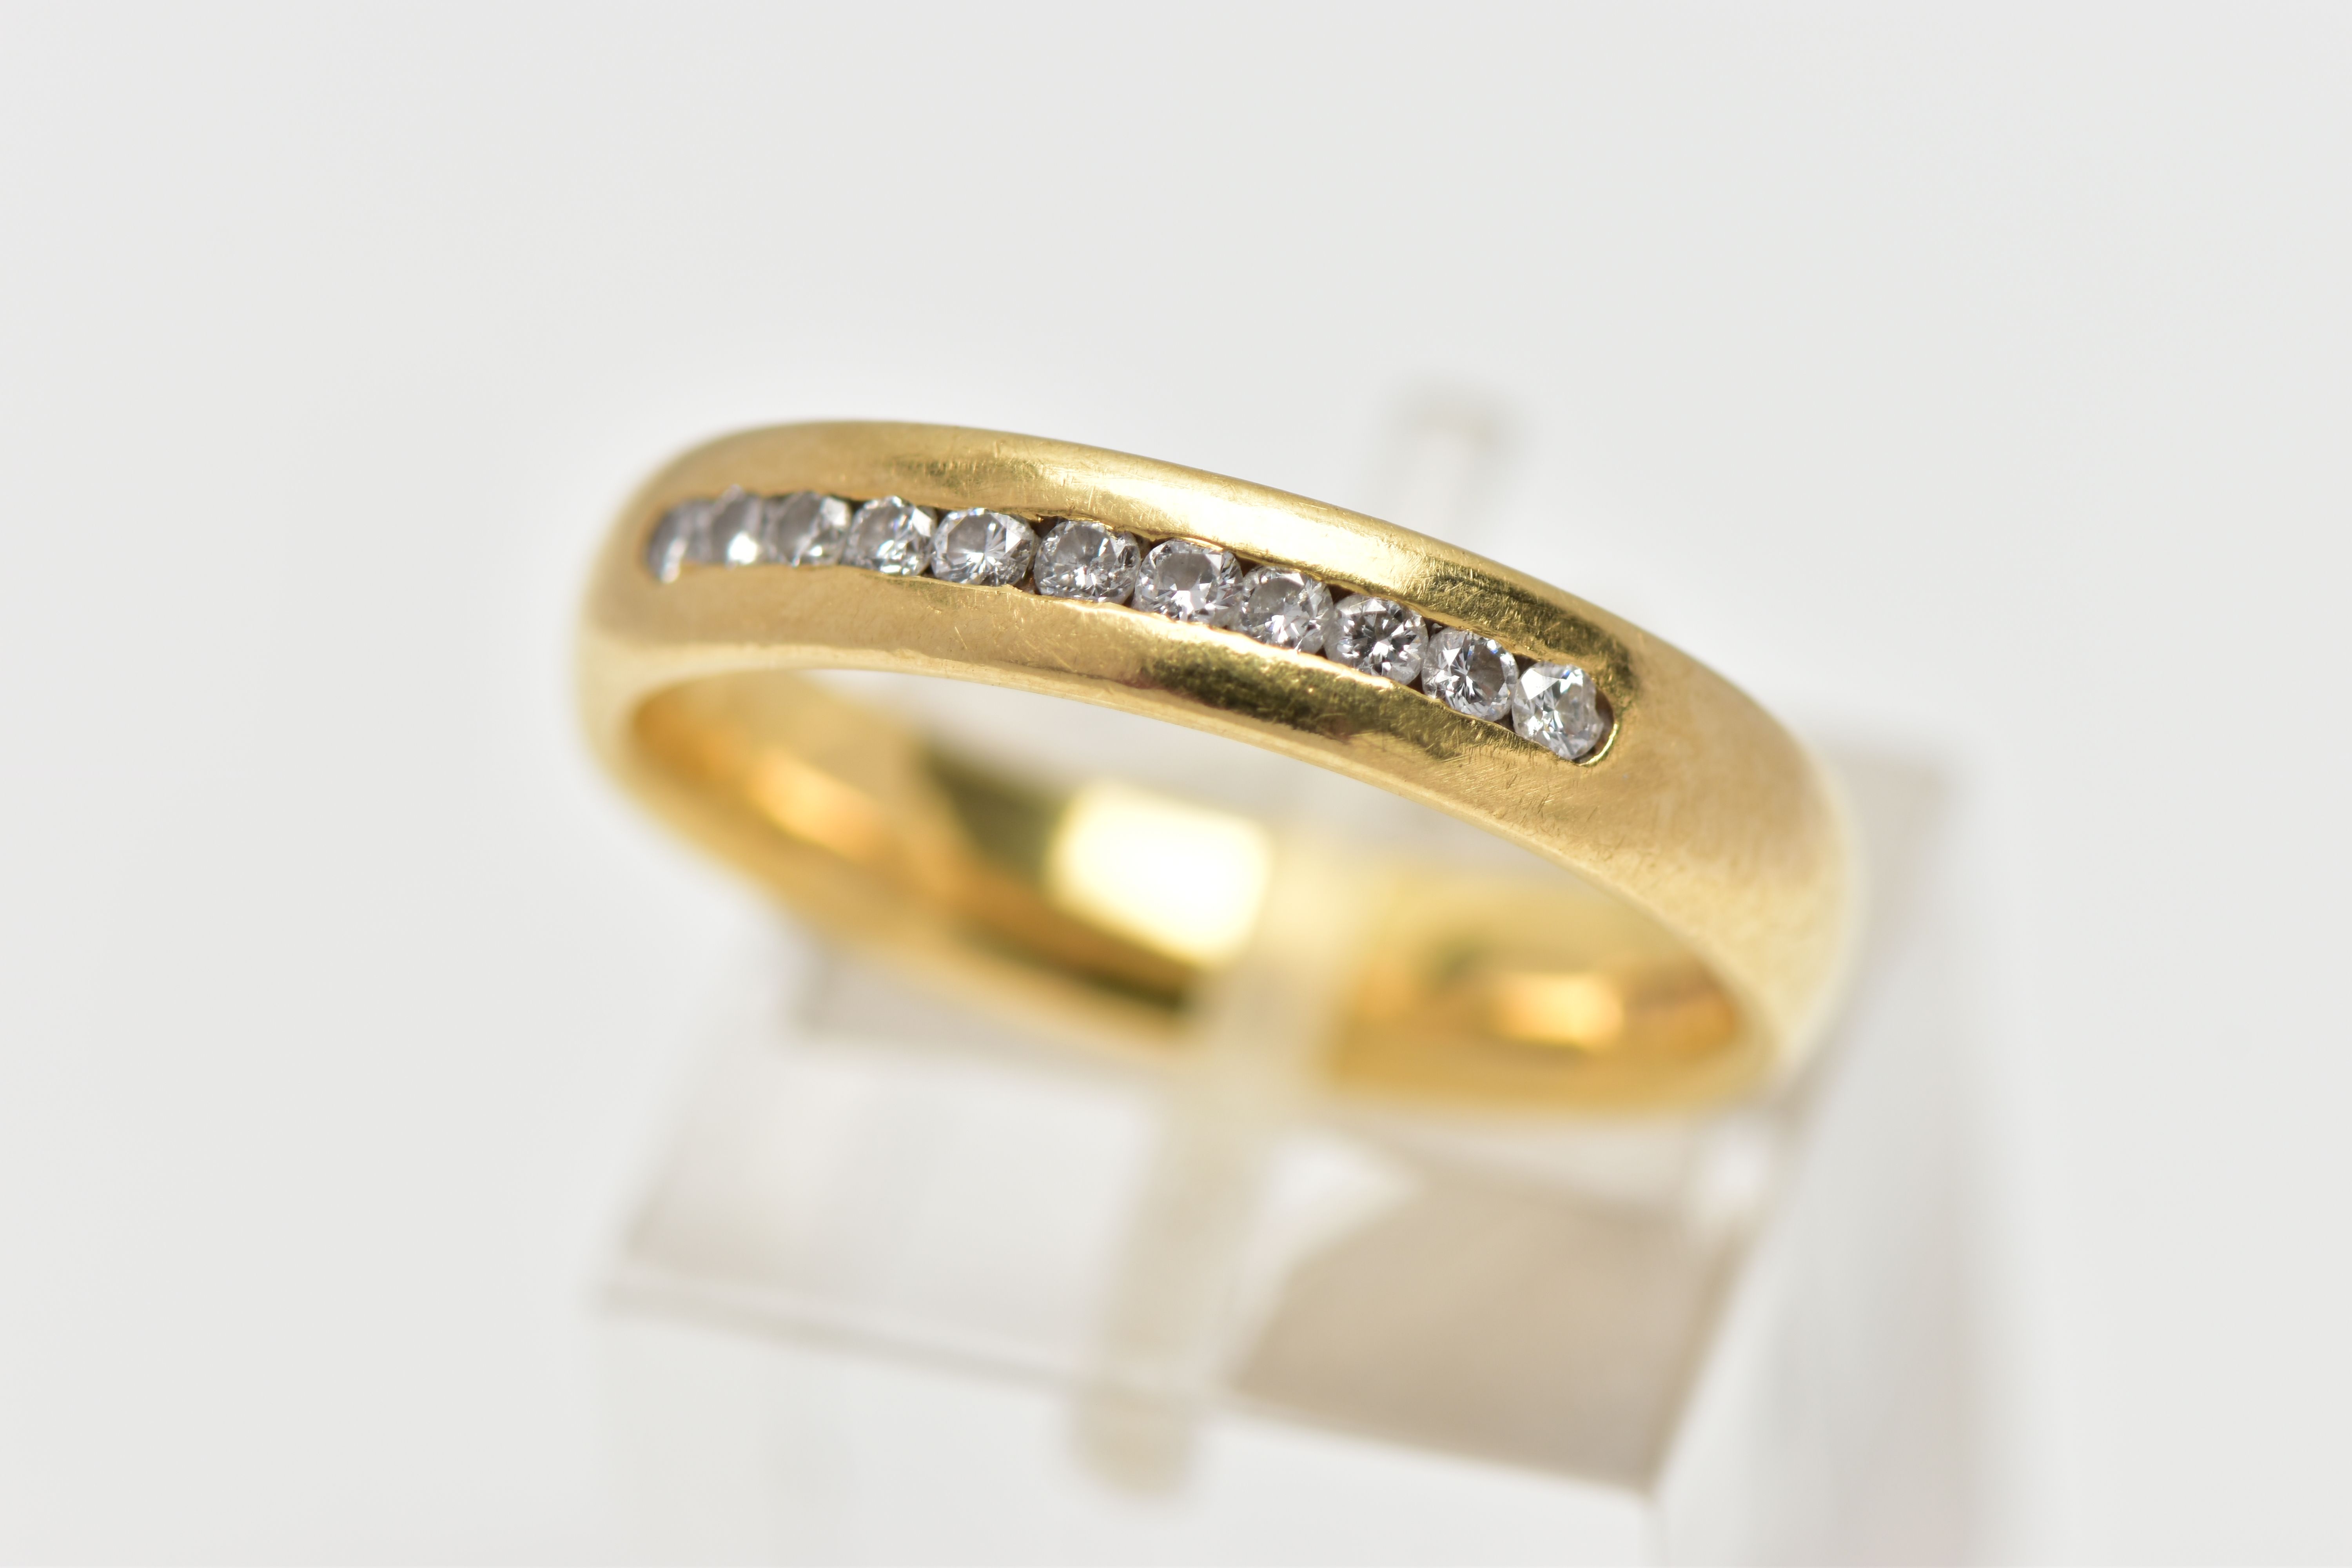 AN 18CT YELLOW GOLD DIAMOND BAND RING, set with a line of eleven round brilliant cut diamonds,